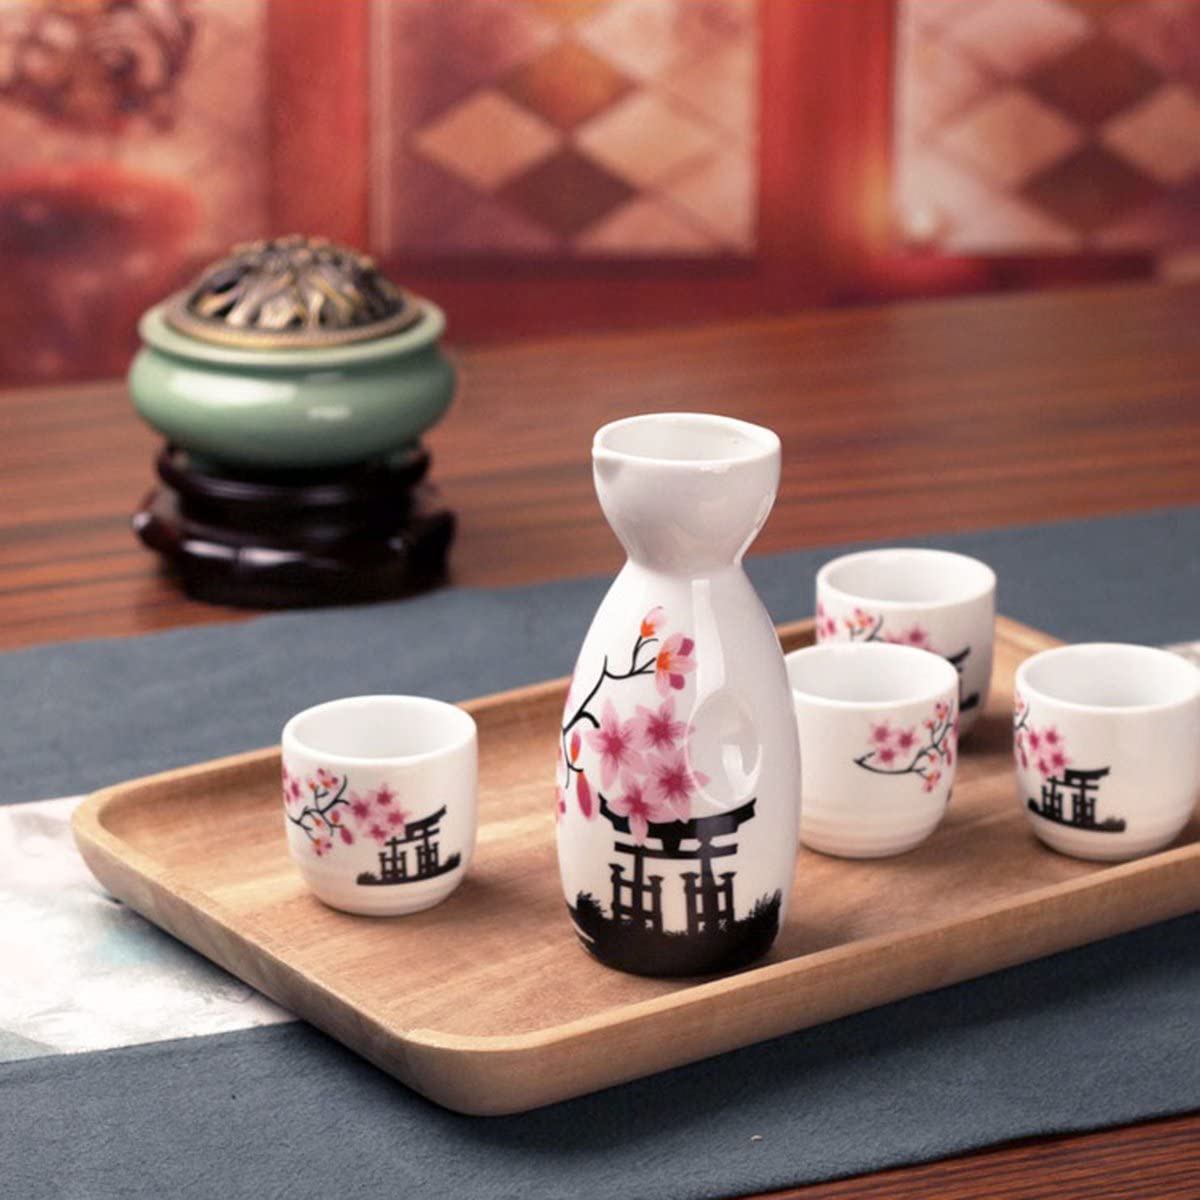 Sake bottle and drinking cups - Image by Amazon.com